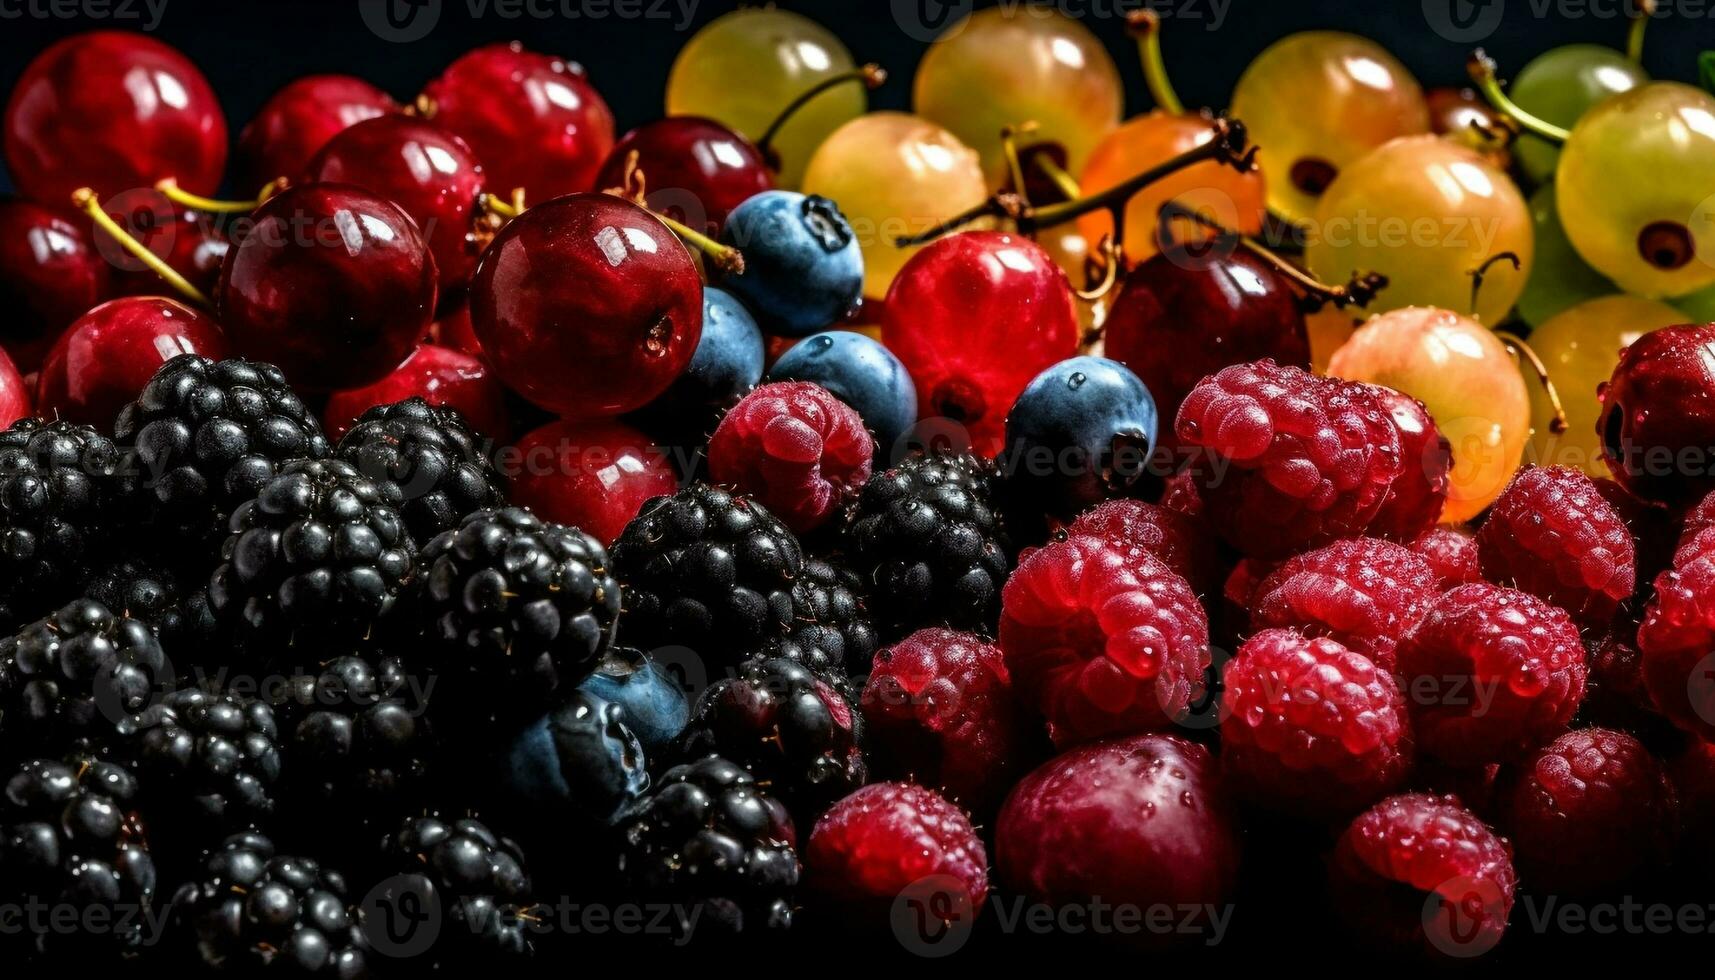 A juicy bowl of mixed berries, a healthy summer snack generated by AI photo